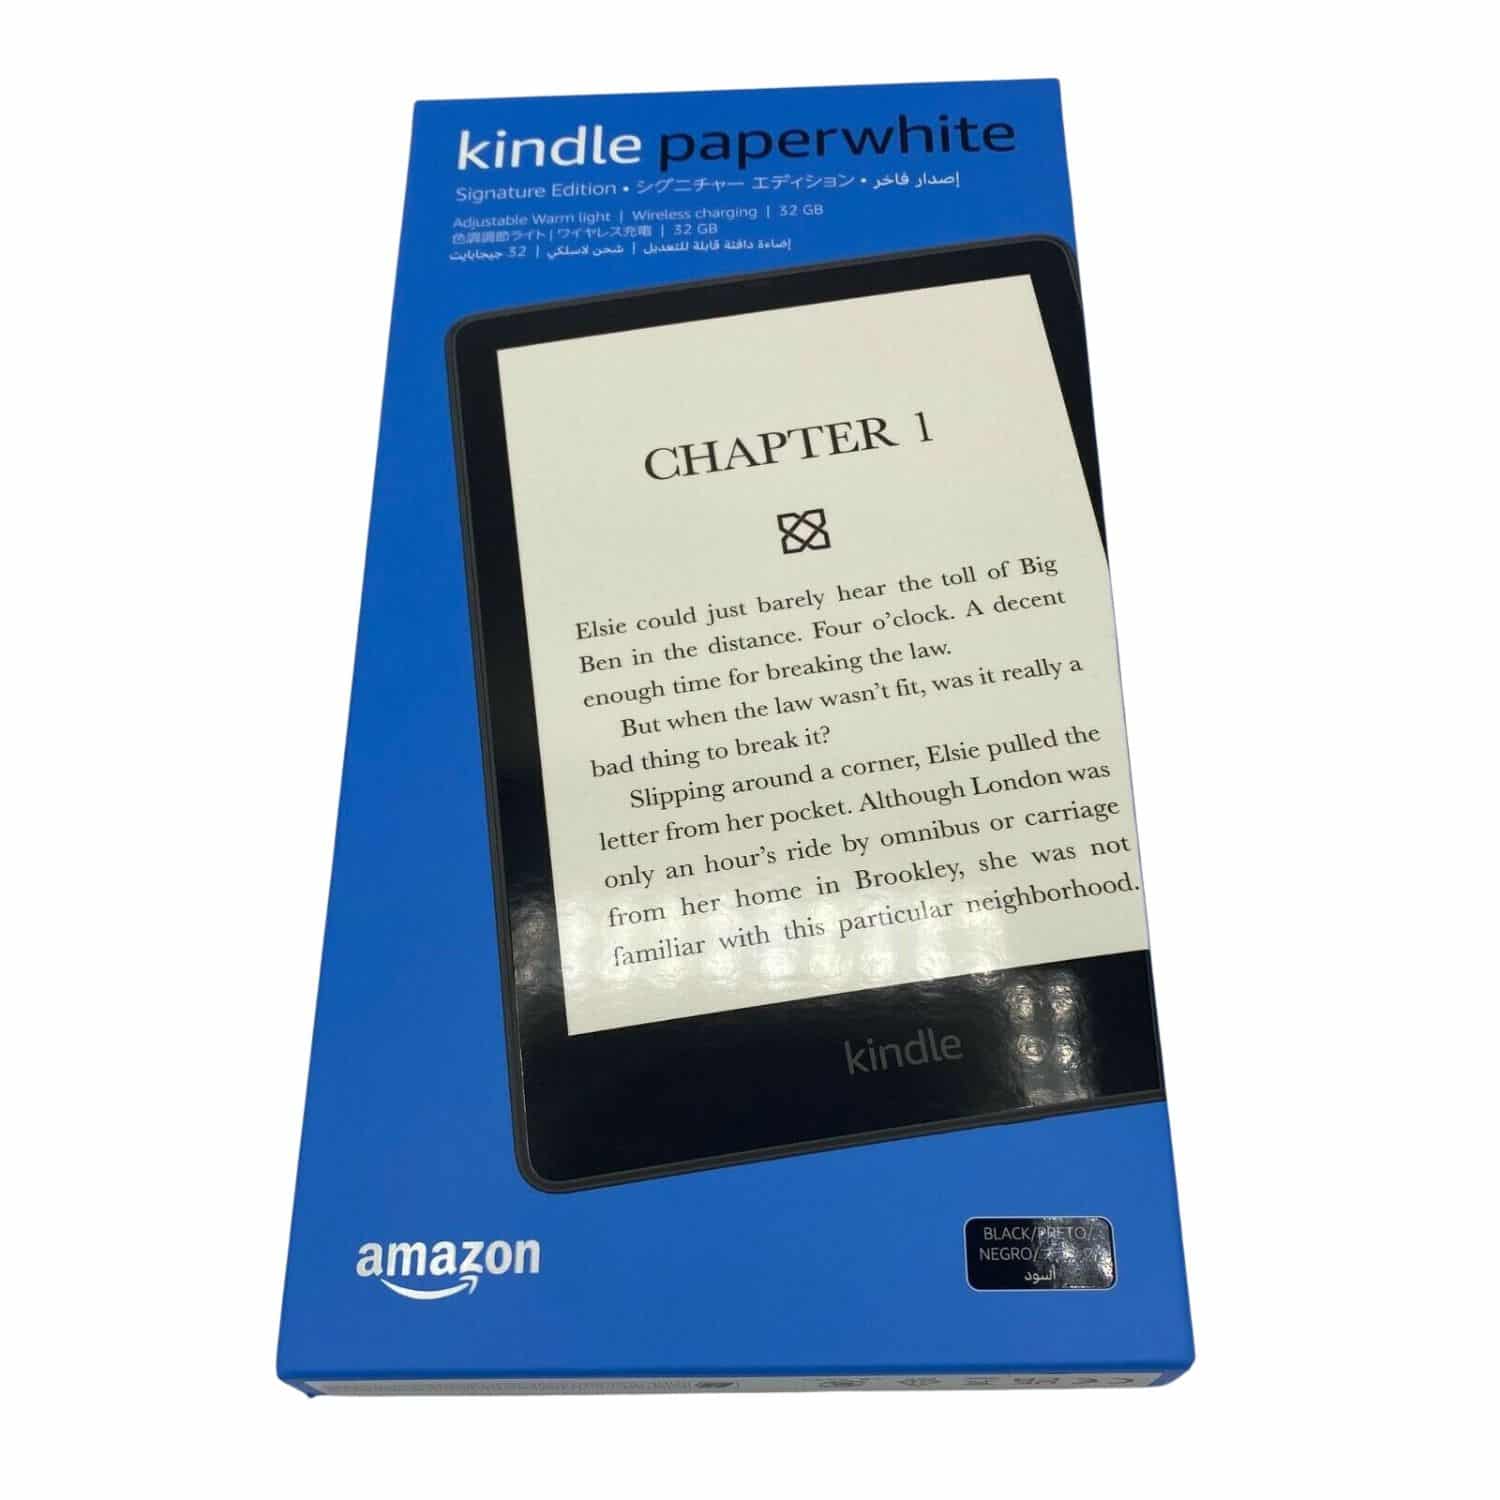 Kindle Signature Paperwhite with wireless charging dock and denim case